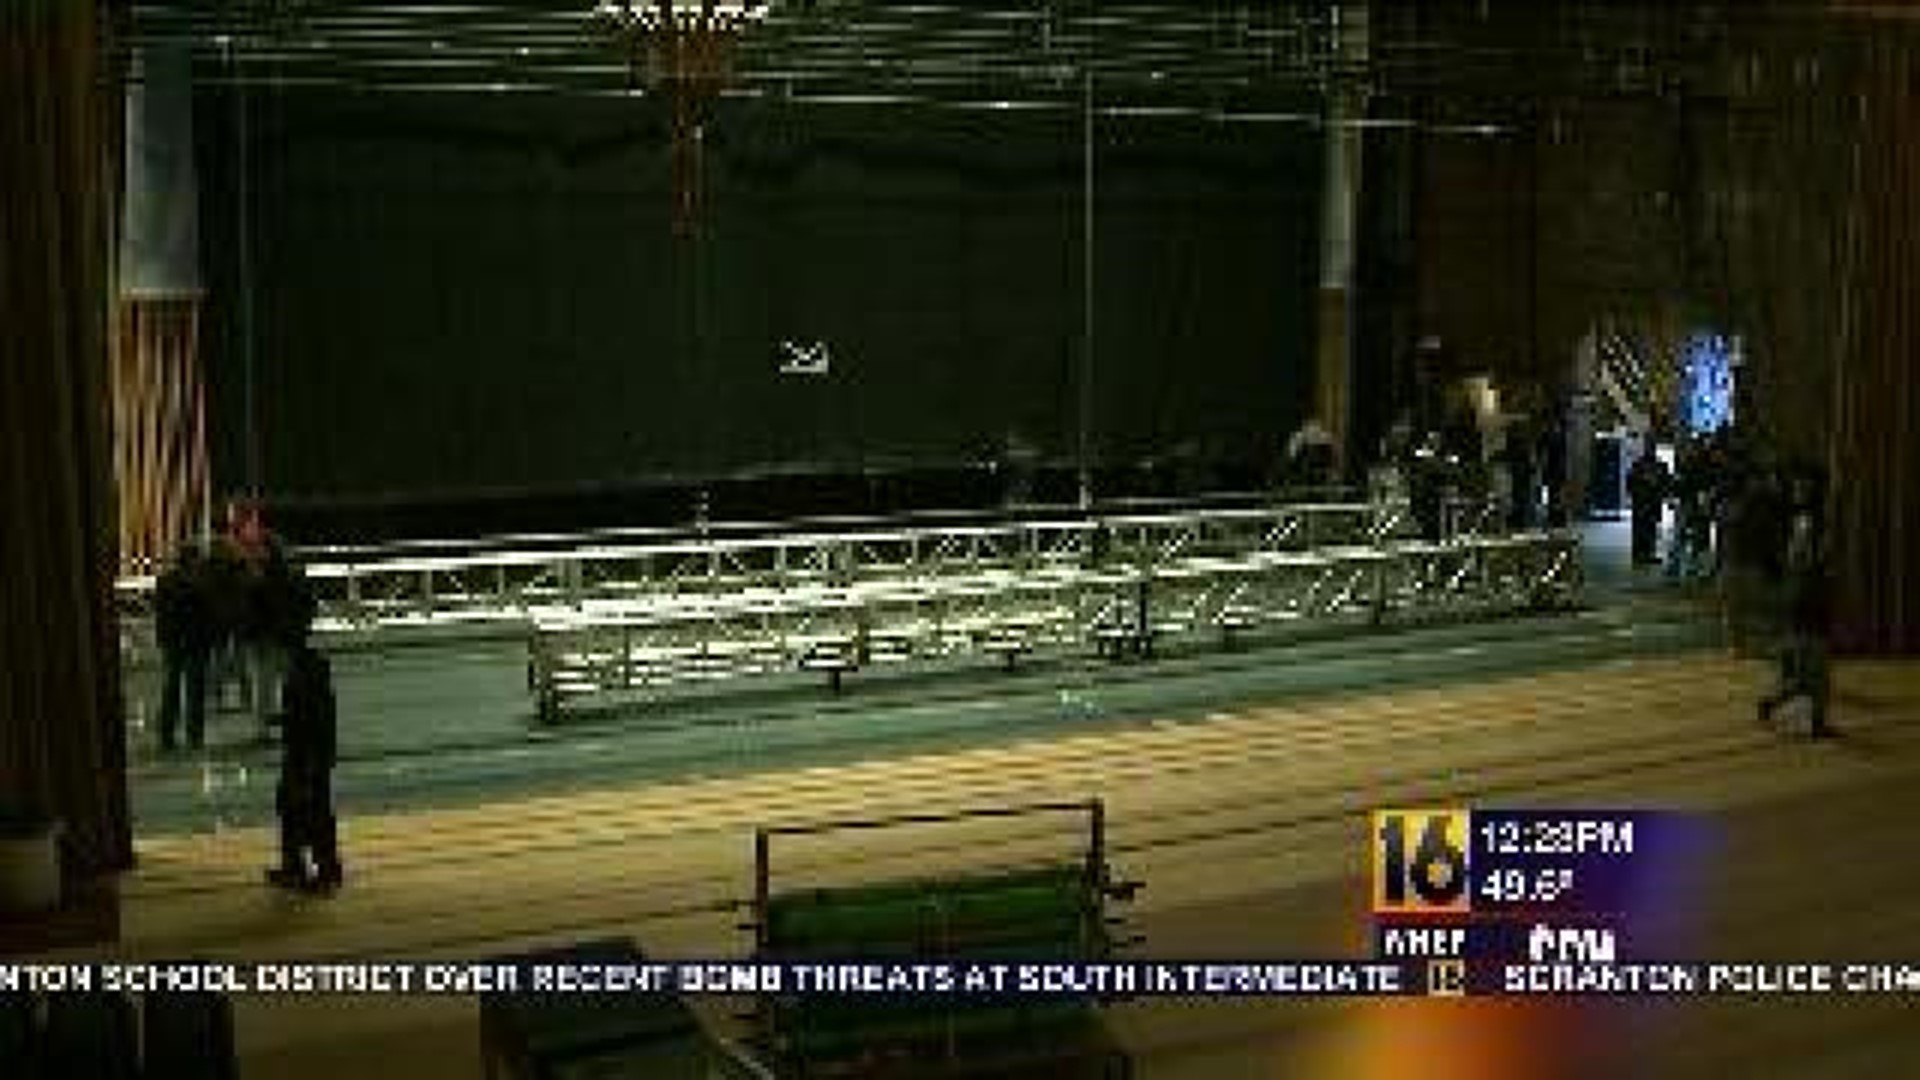 Workers Setting The Stage For Broadway In Scranton